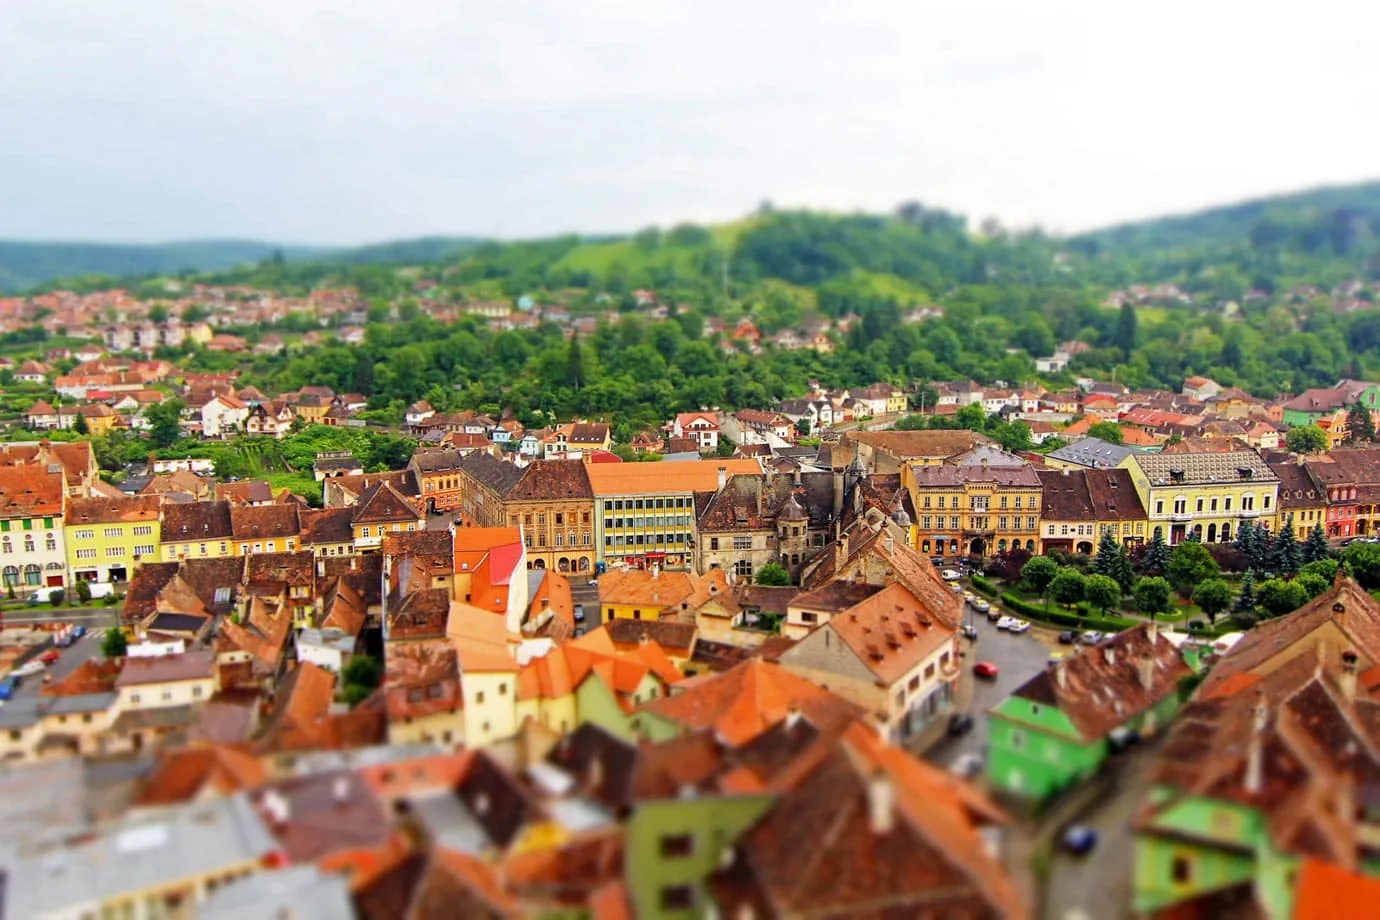 A view of Old Town from the Clock Tower in Sighisoara